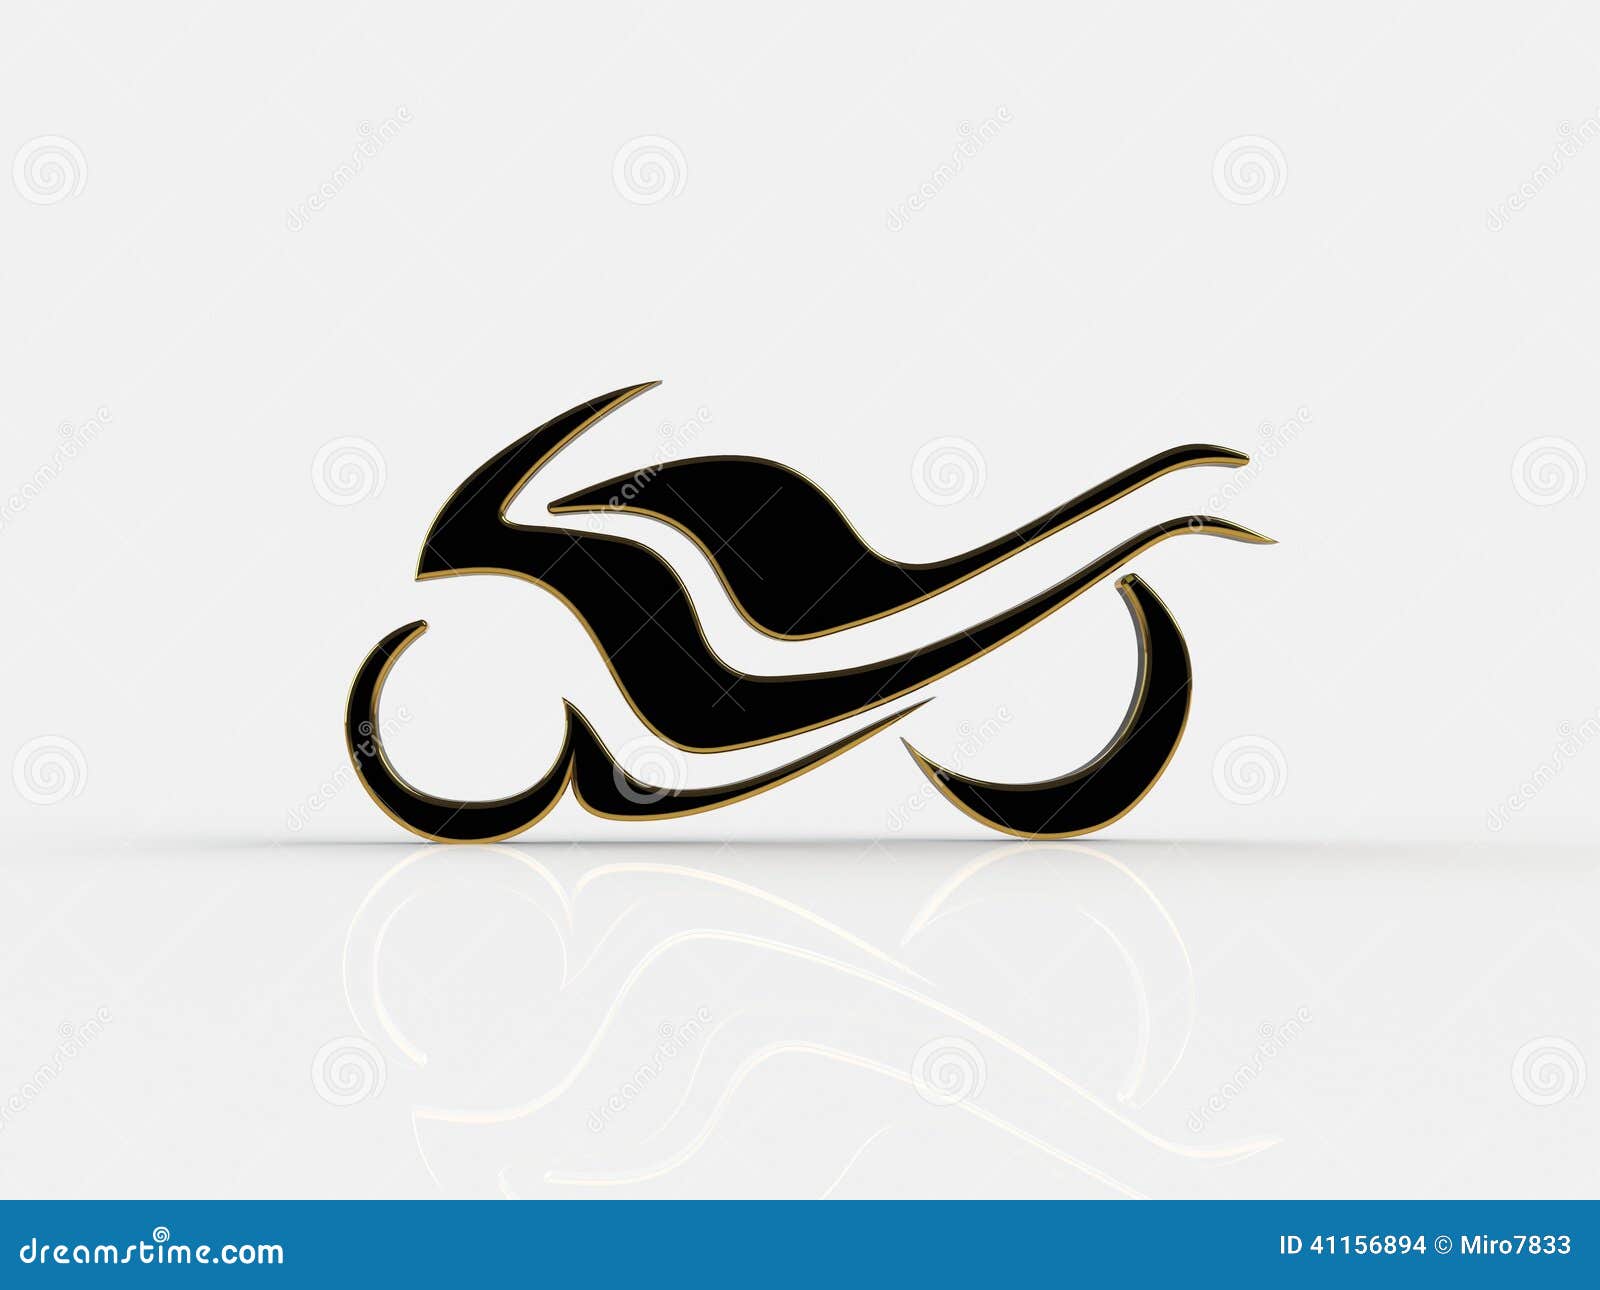 Abstract Racing Motorcycle On A White Background Stock Illustration - Illustration of ...1300 x 1065